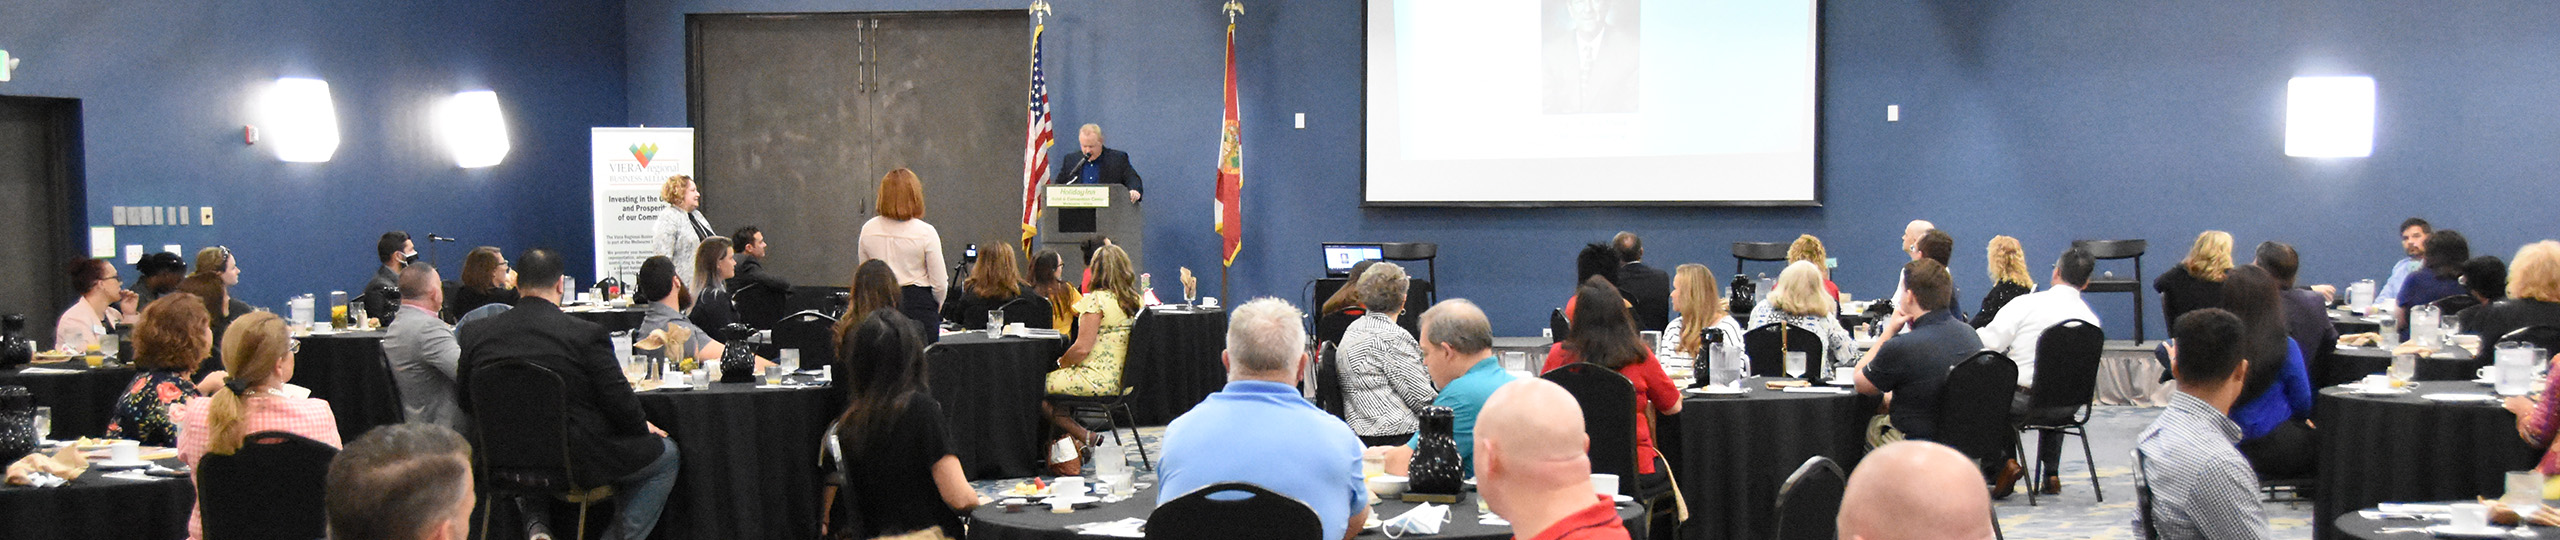 Viera Regional Business Alliance meeting with many attendees